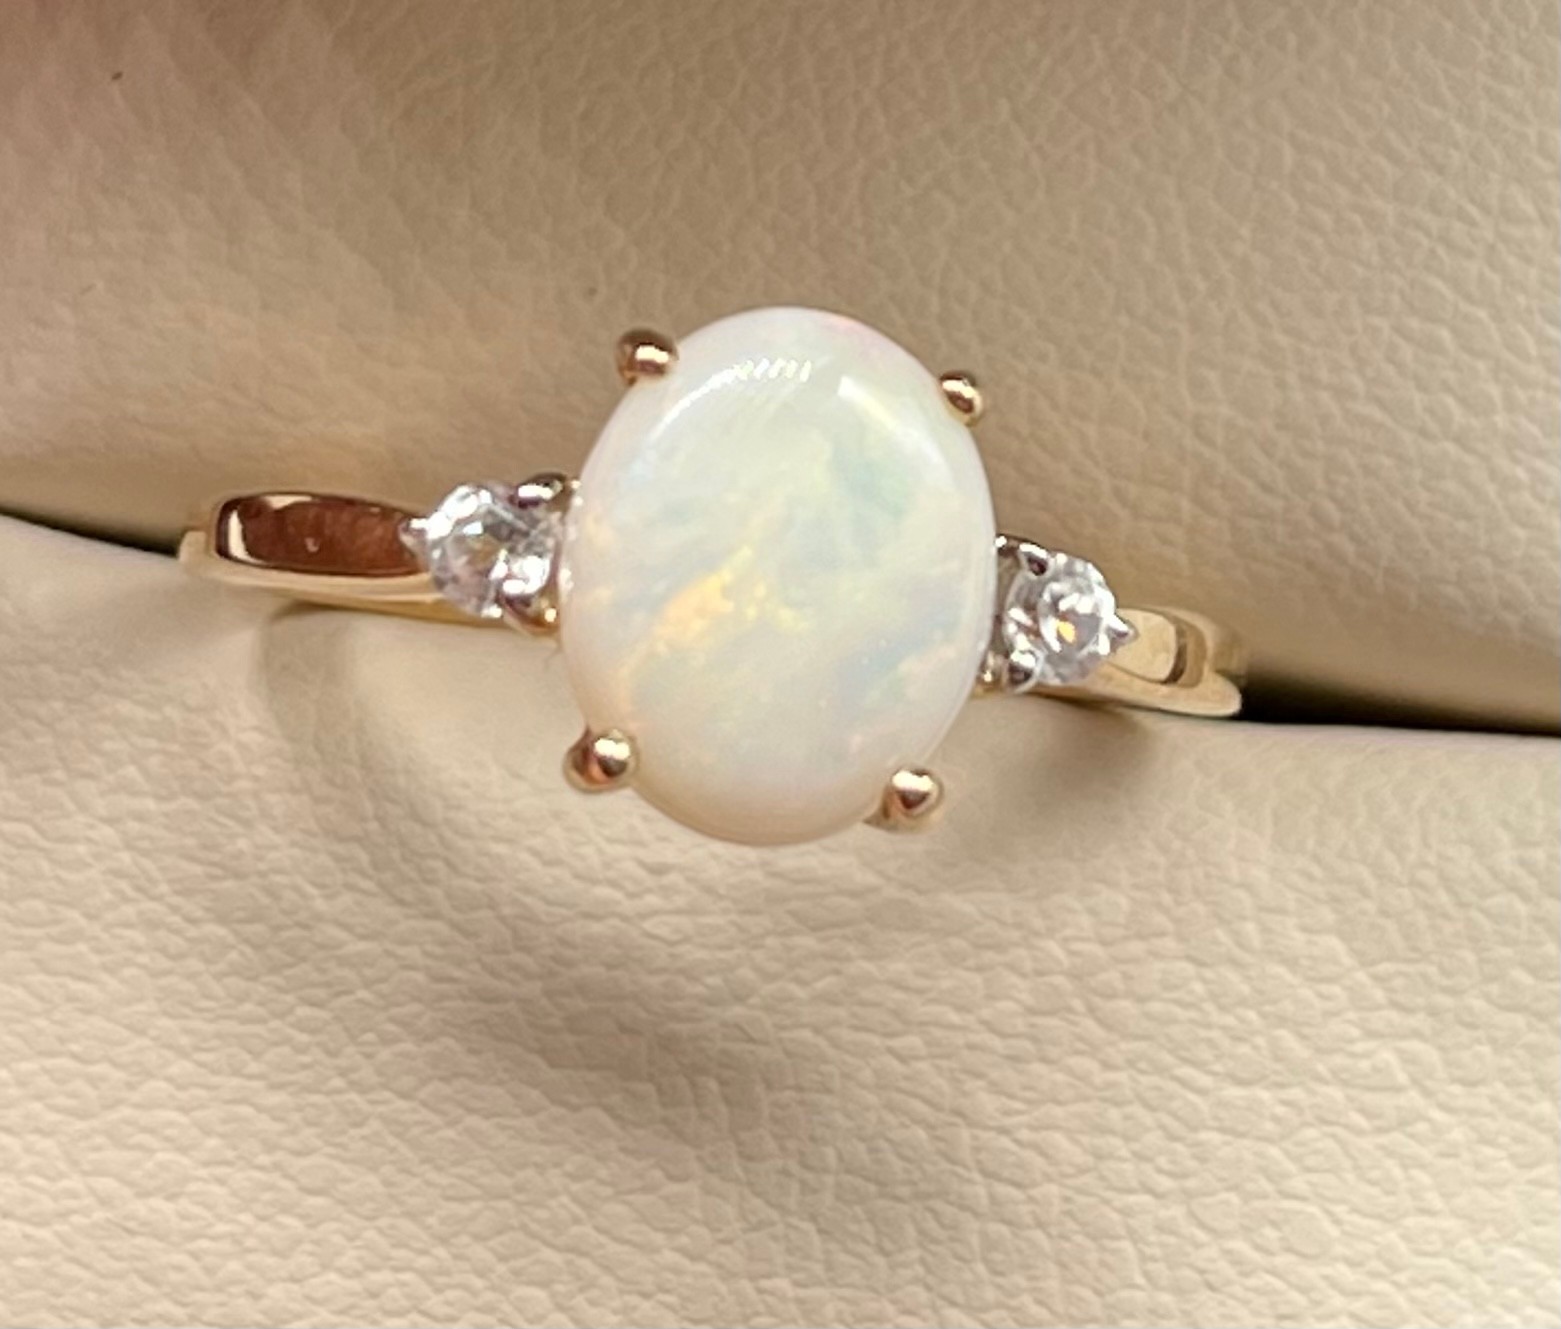 10ct yellow gold ladies ring set with an white opal stone off set by White Spinel stones. [Ring size - Image 2 of 2